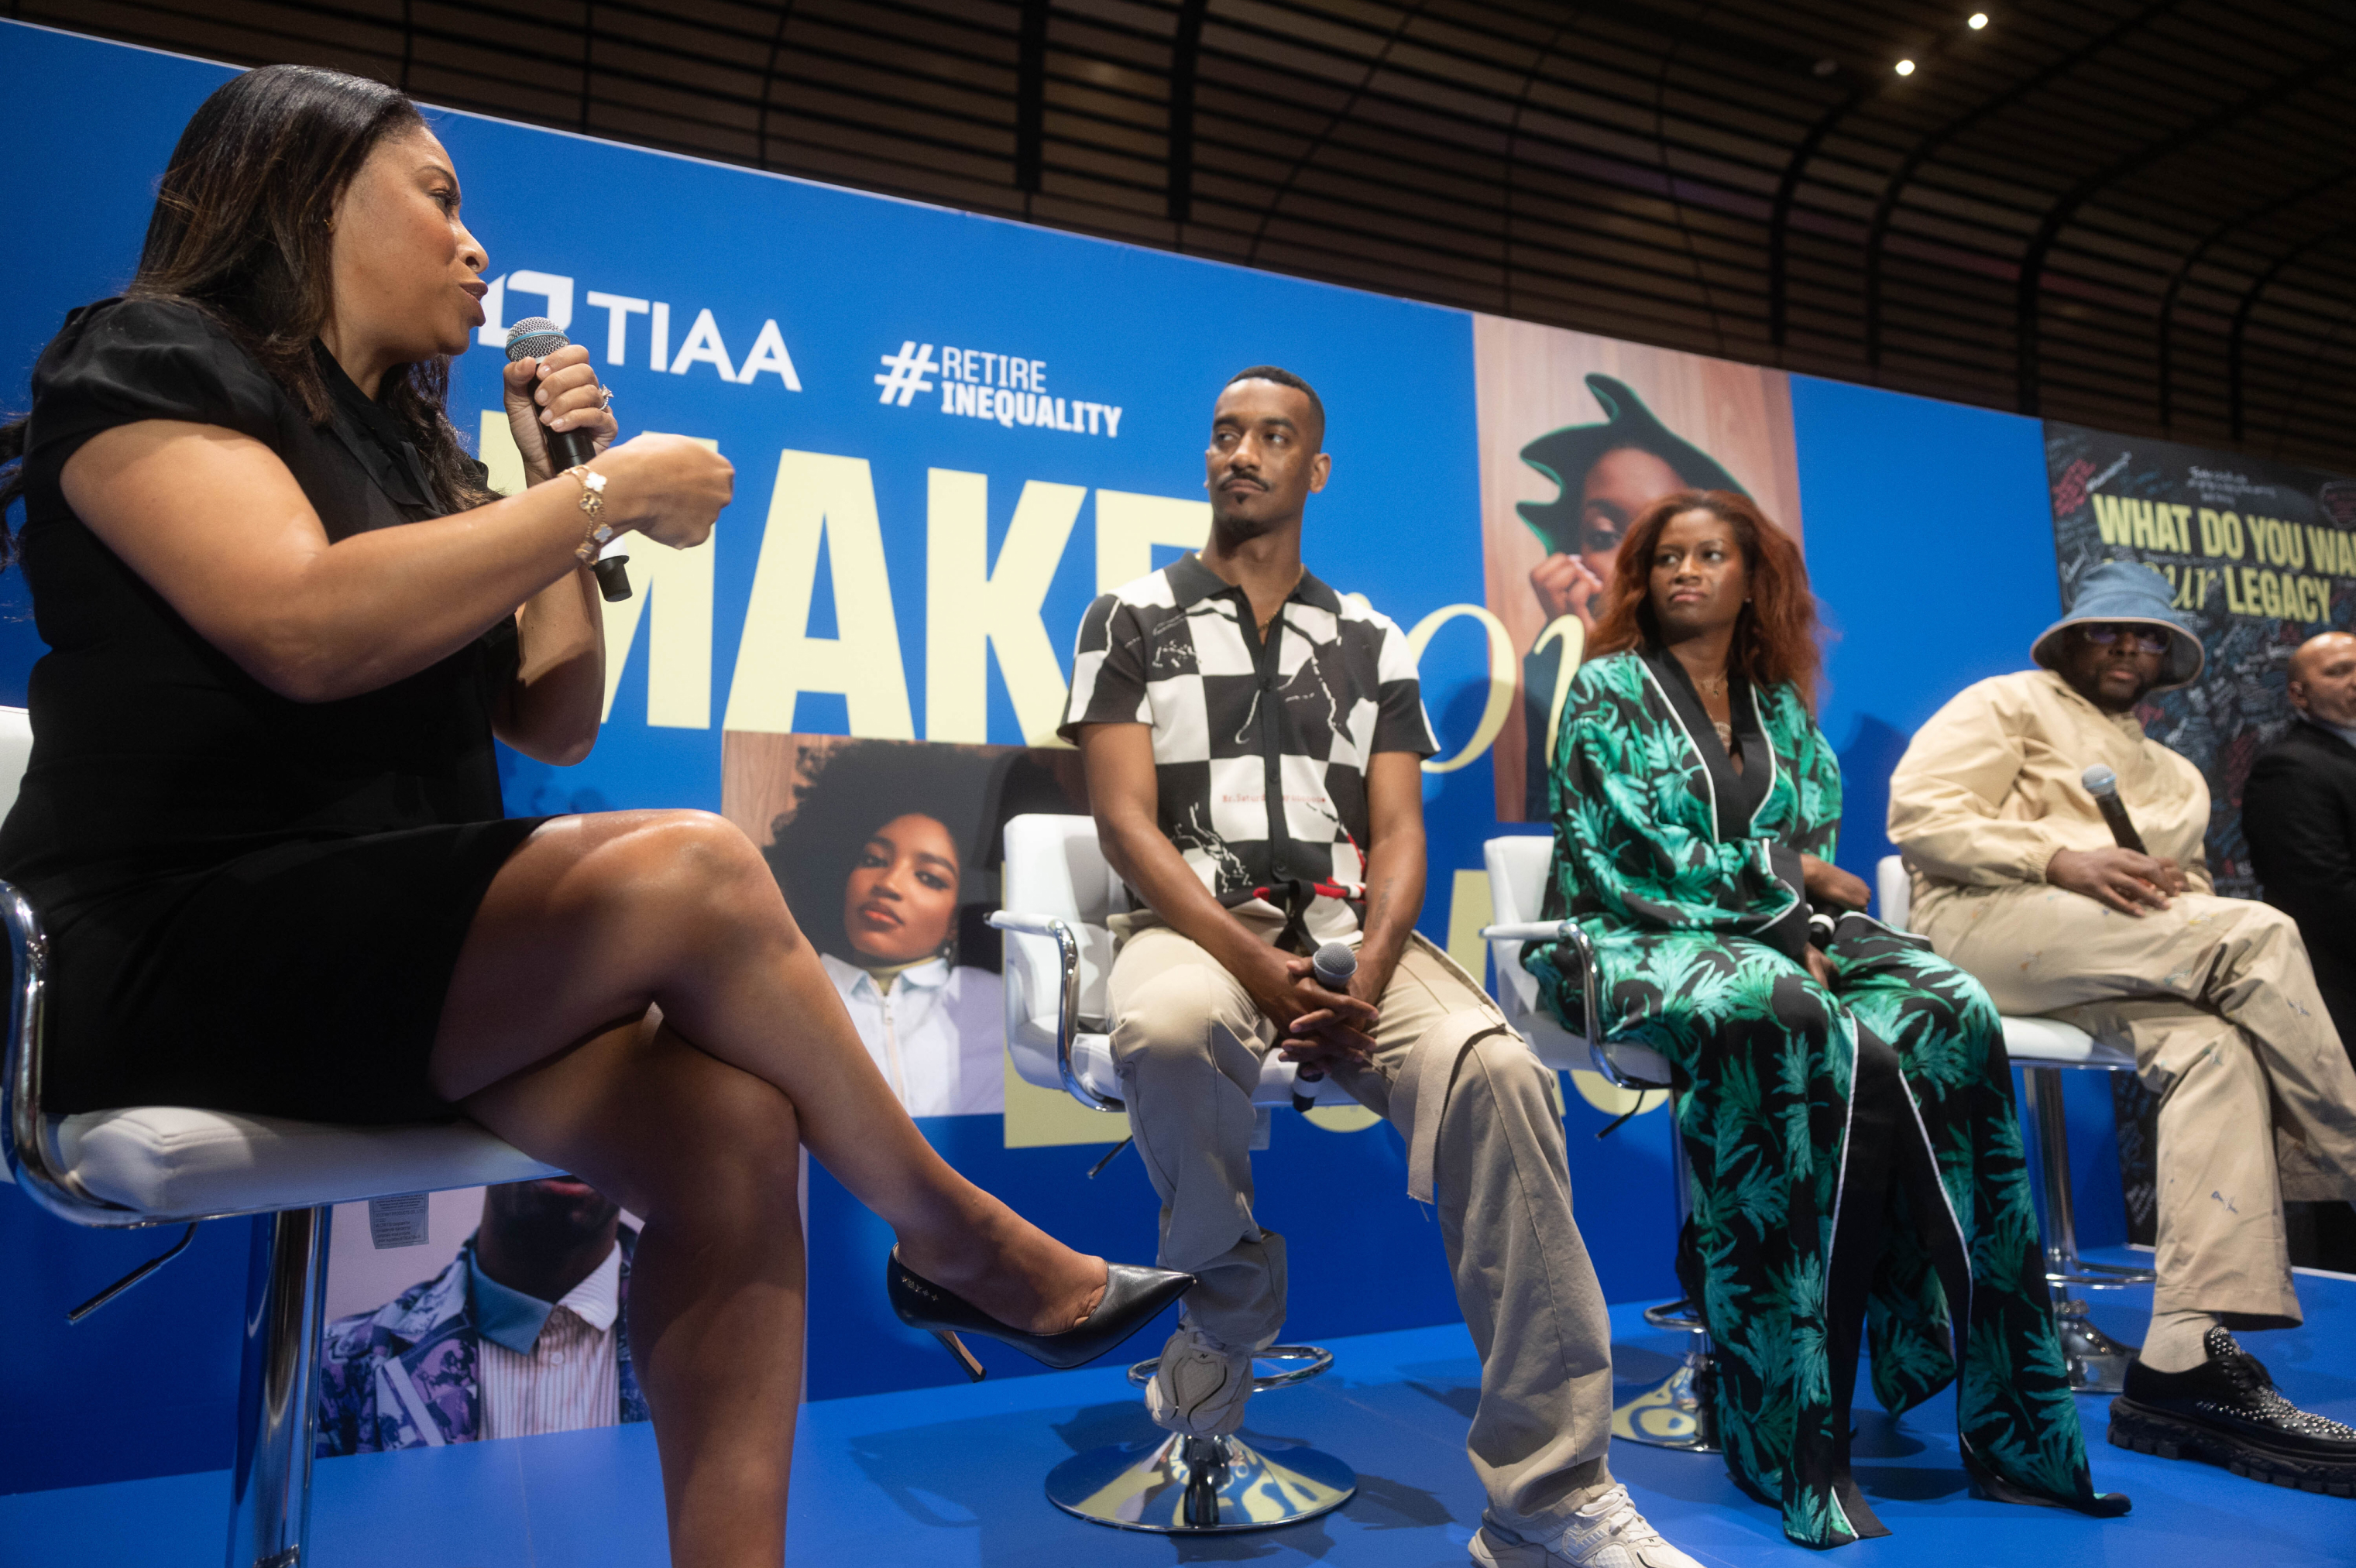 Click image of celebrity panelists at event discussing retirement inequality to navigate to article: TIAA's Legacy Makers commit to "Retire Inequality" at ESSENCE Opens in new window